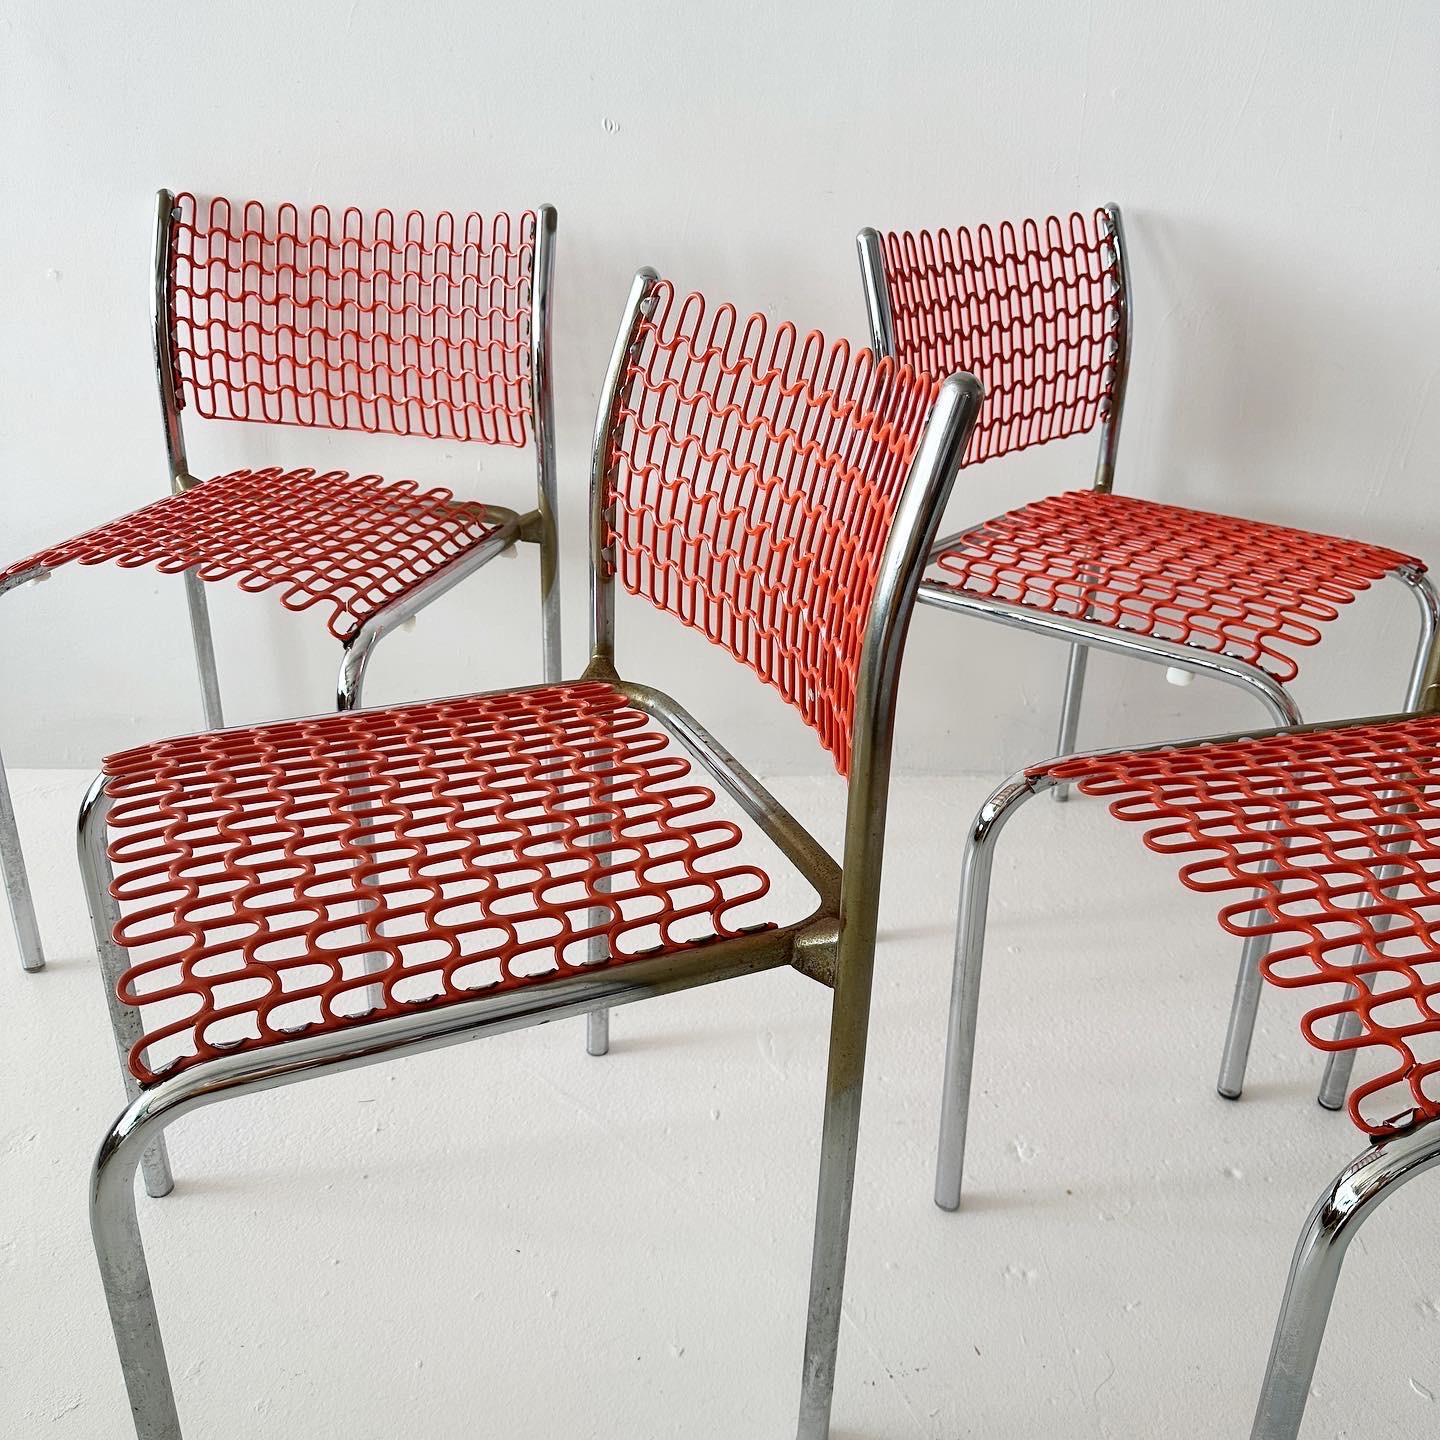 Orange Sof Tech Chairs by David Rowland for Thonet (set of 4) In Good Condition For Sale In Los Angeles, CA